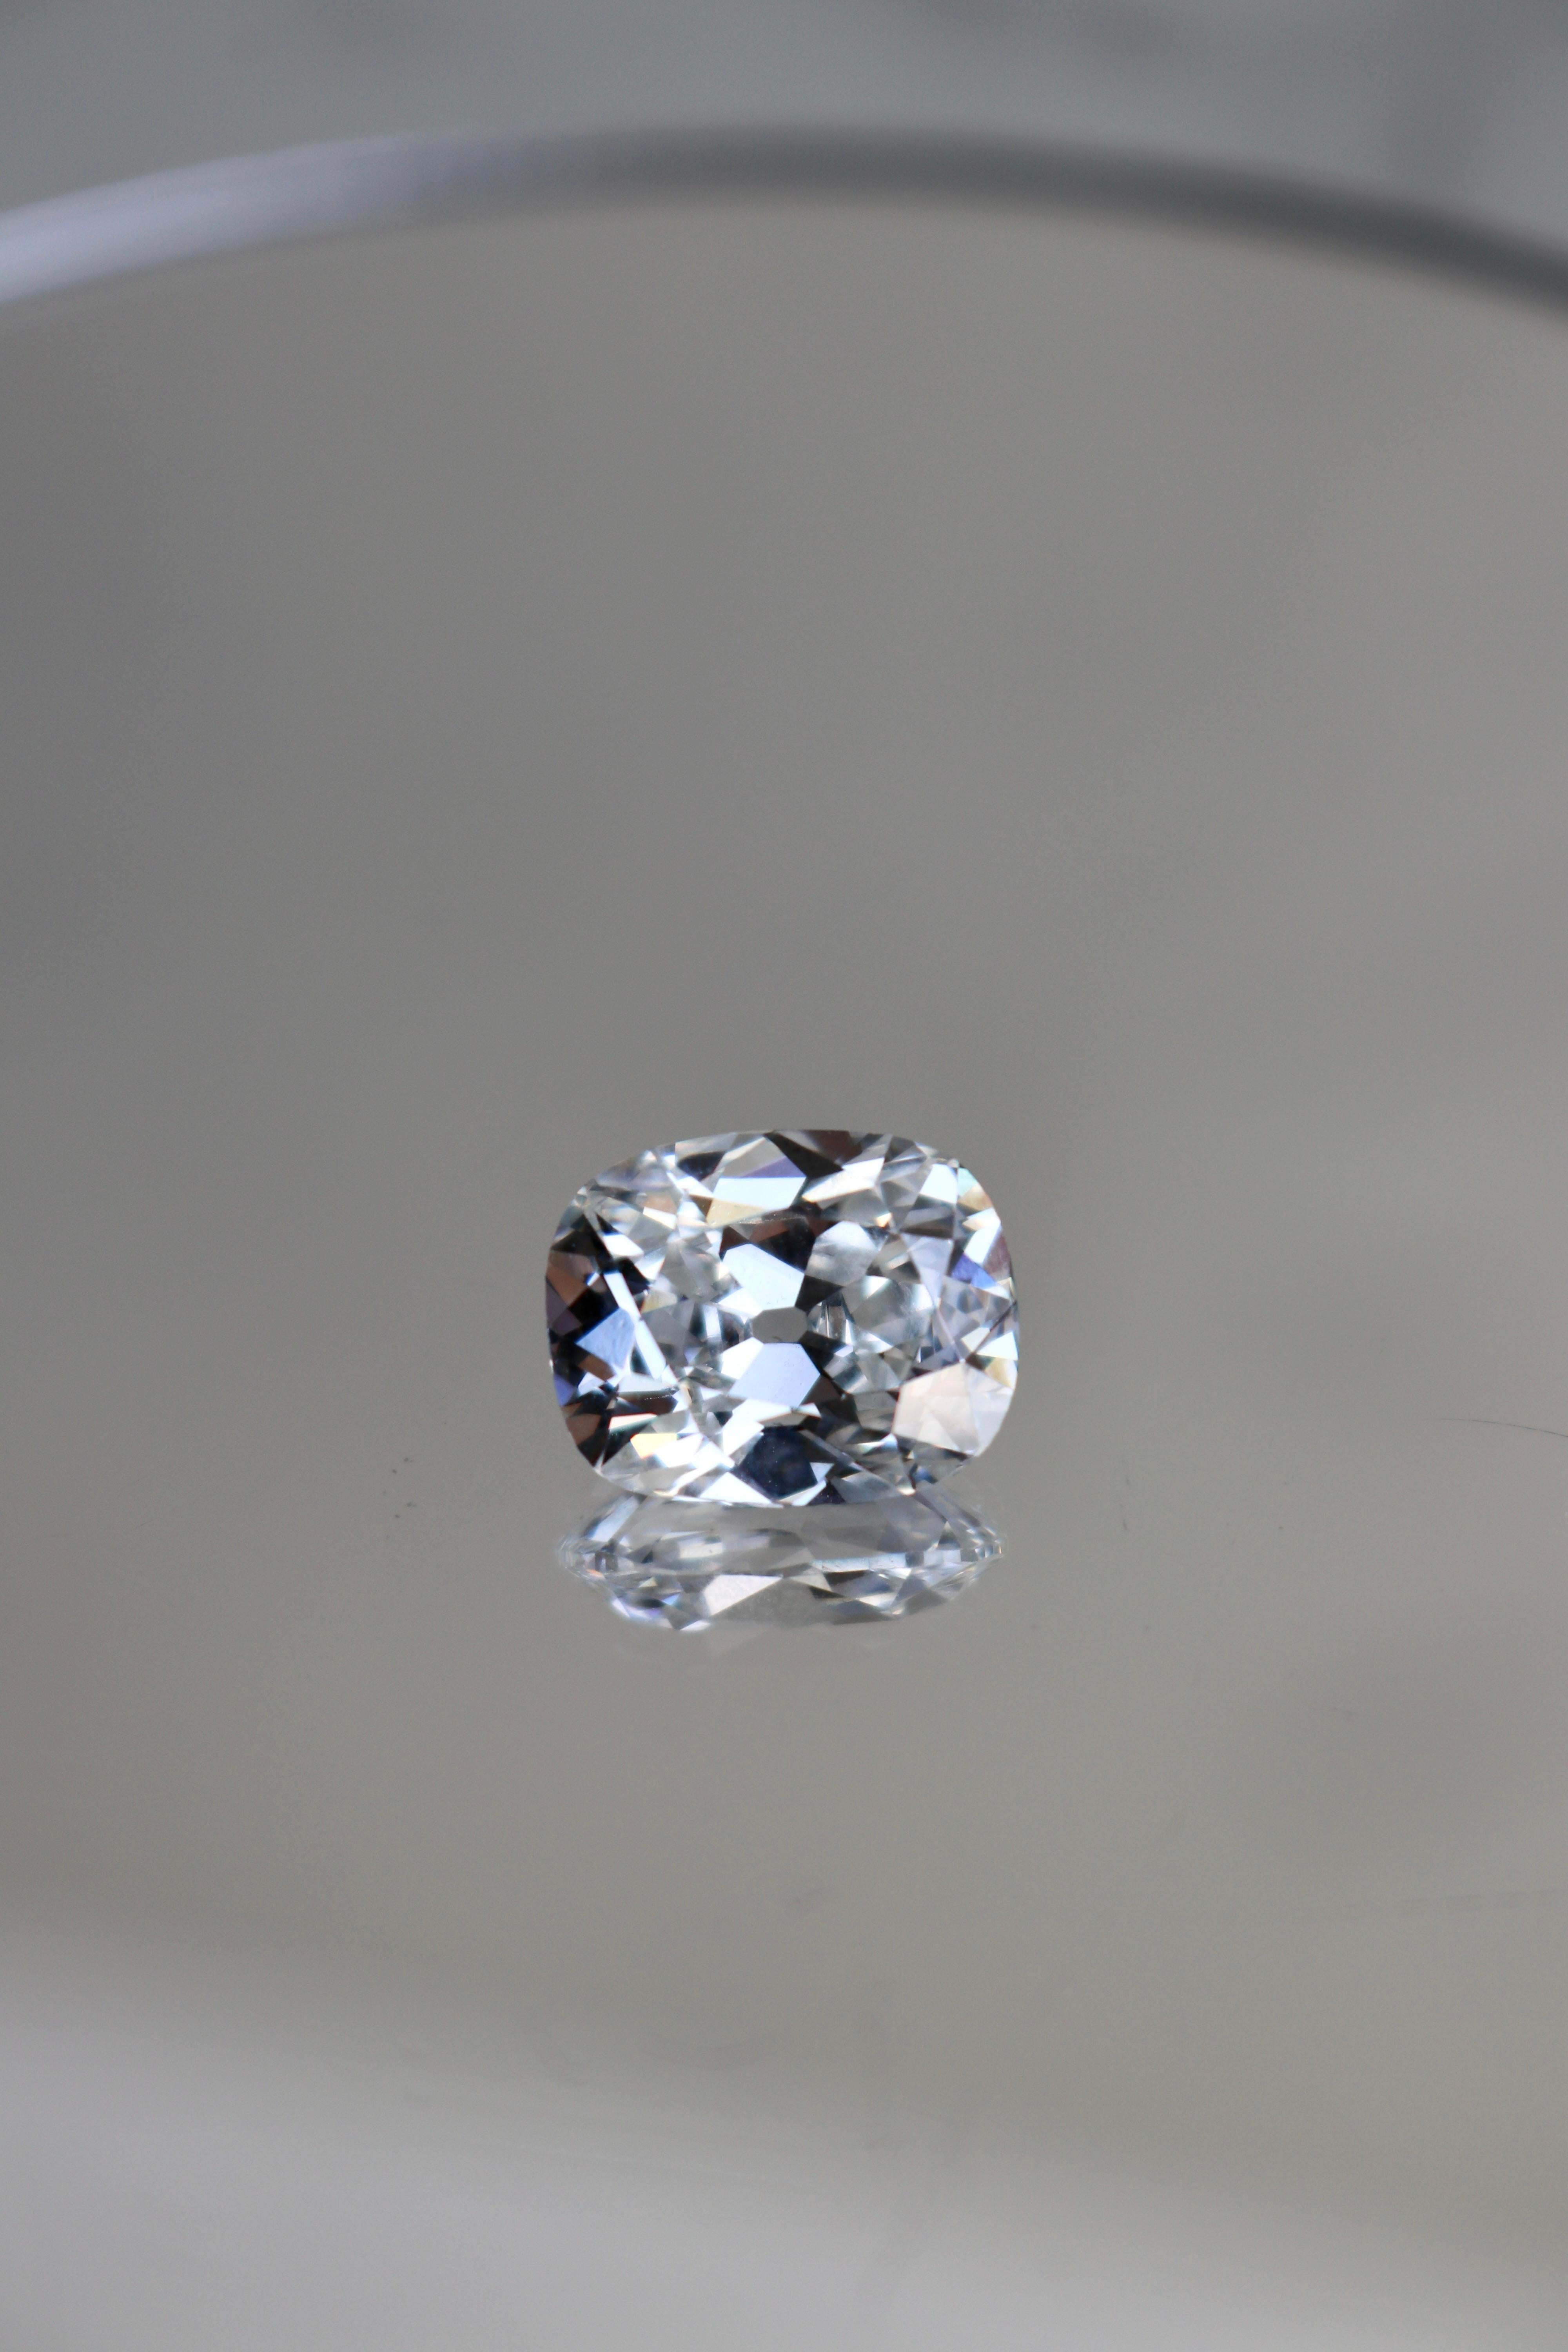 One GIA 4.52 Carat Cushion Modified Brilliant Cut Loose Diamond. Accompanied by GIA #2239209305 stating the diamond is F color, VS2 clarity.  

About this Item: Behold the epitome of magnificence with our spectacular 4.52 carat cushion modified